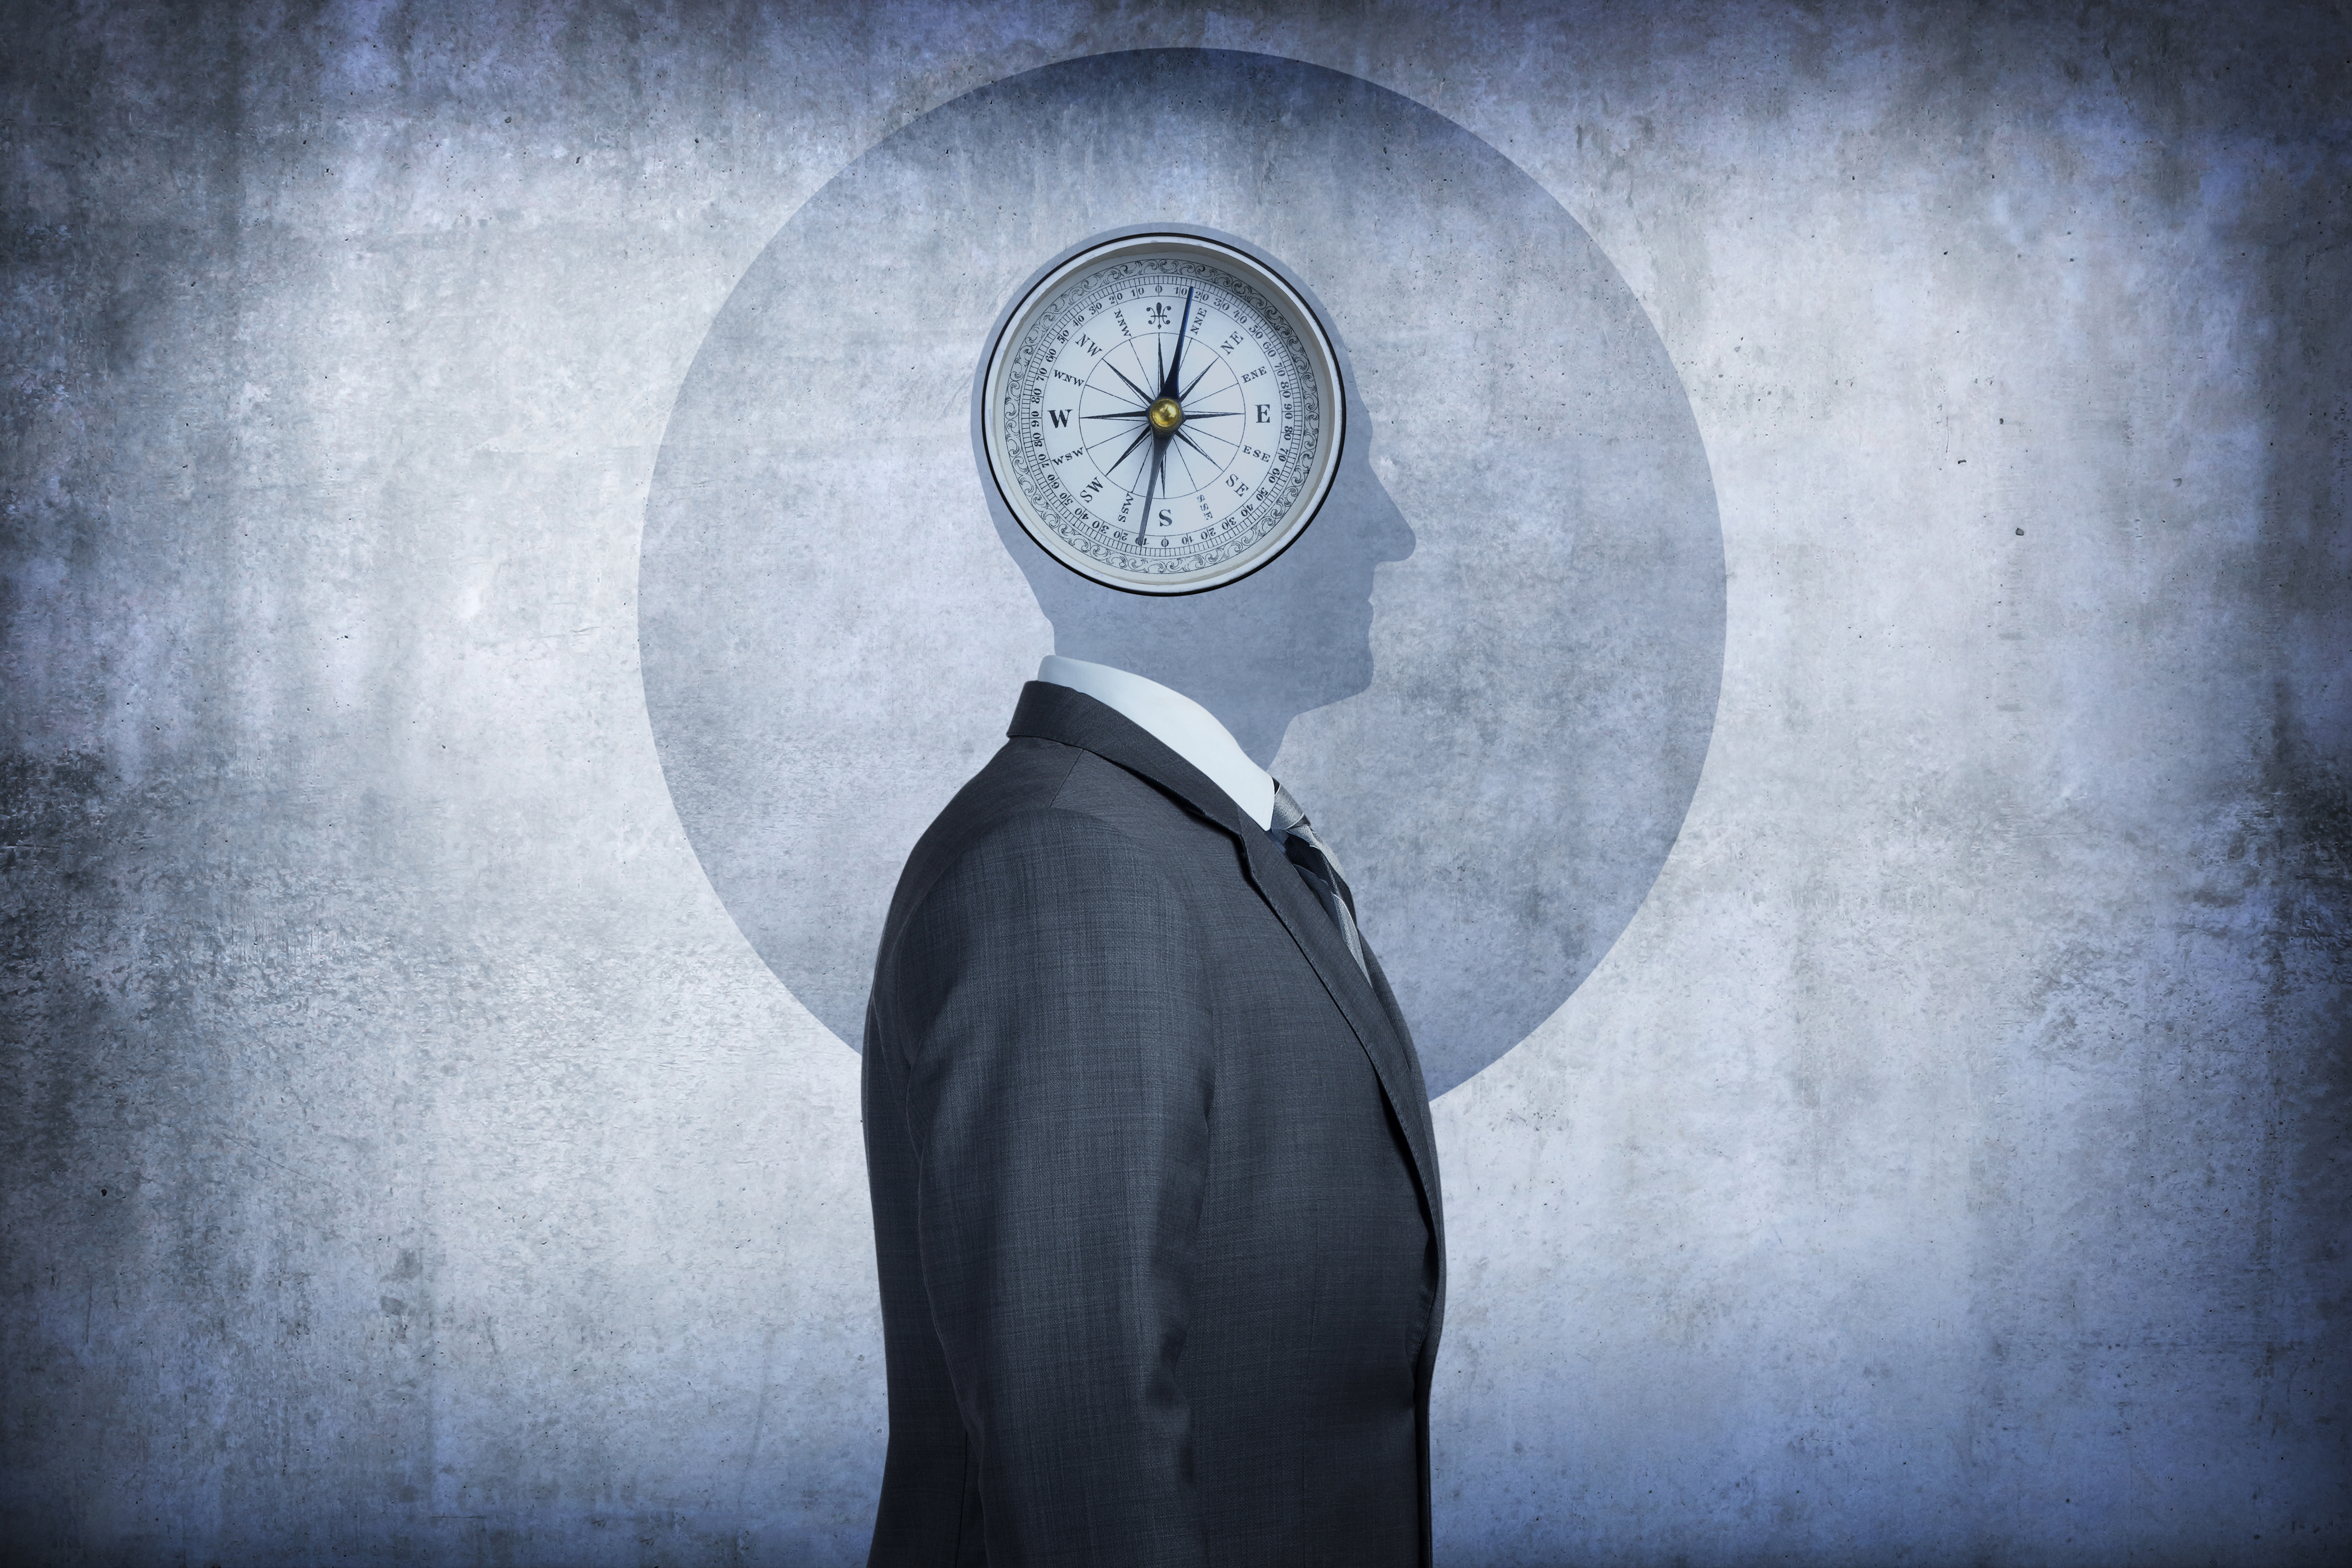 A compass occupies the space over the man's head conveying the concept of morality and the choices we make. The man's head is reduced to its simple shape, devoid of any detail, and is silhouetted against the background. The man, dressed in a suit, stands at a profile to the camera.